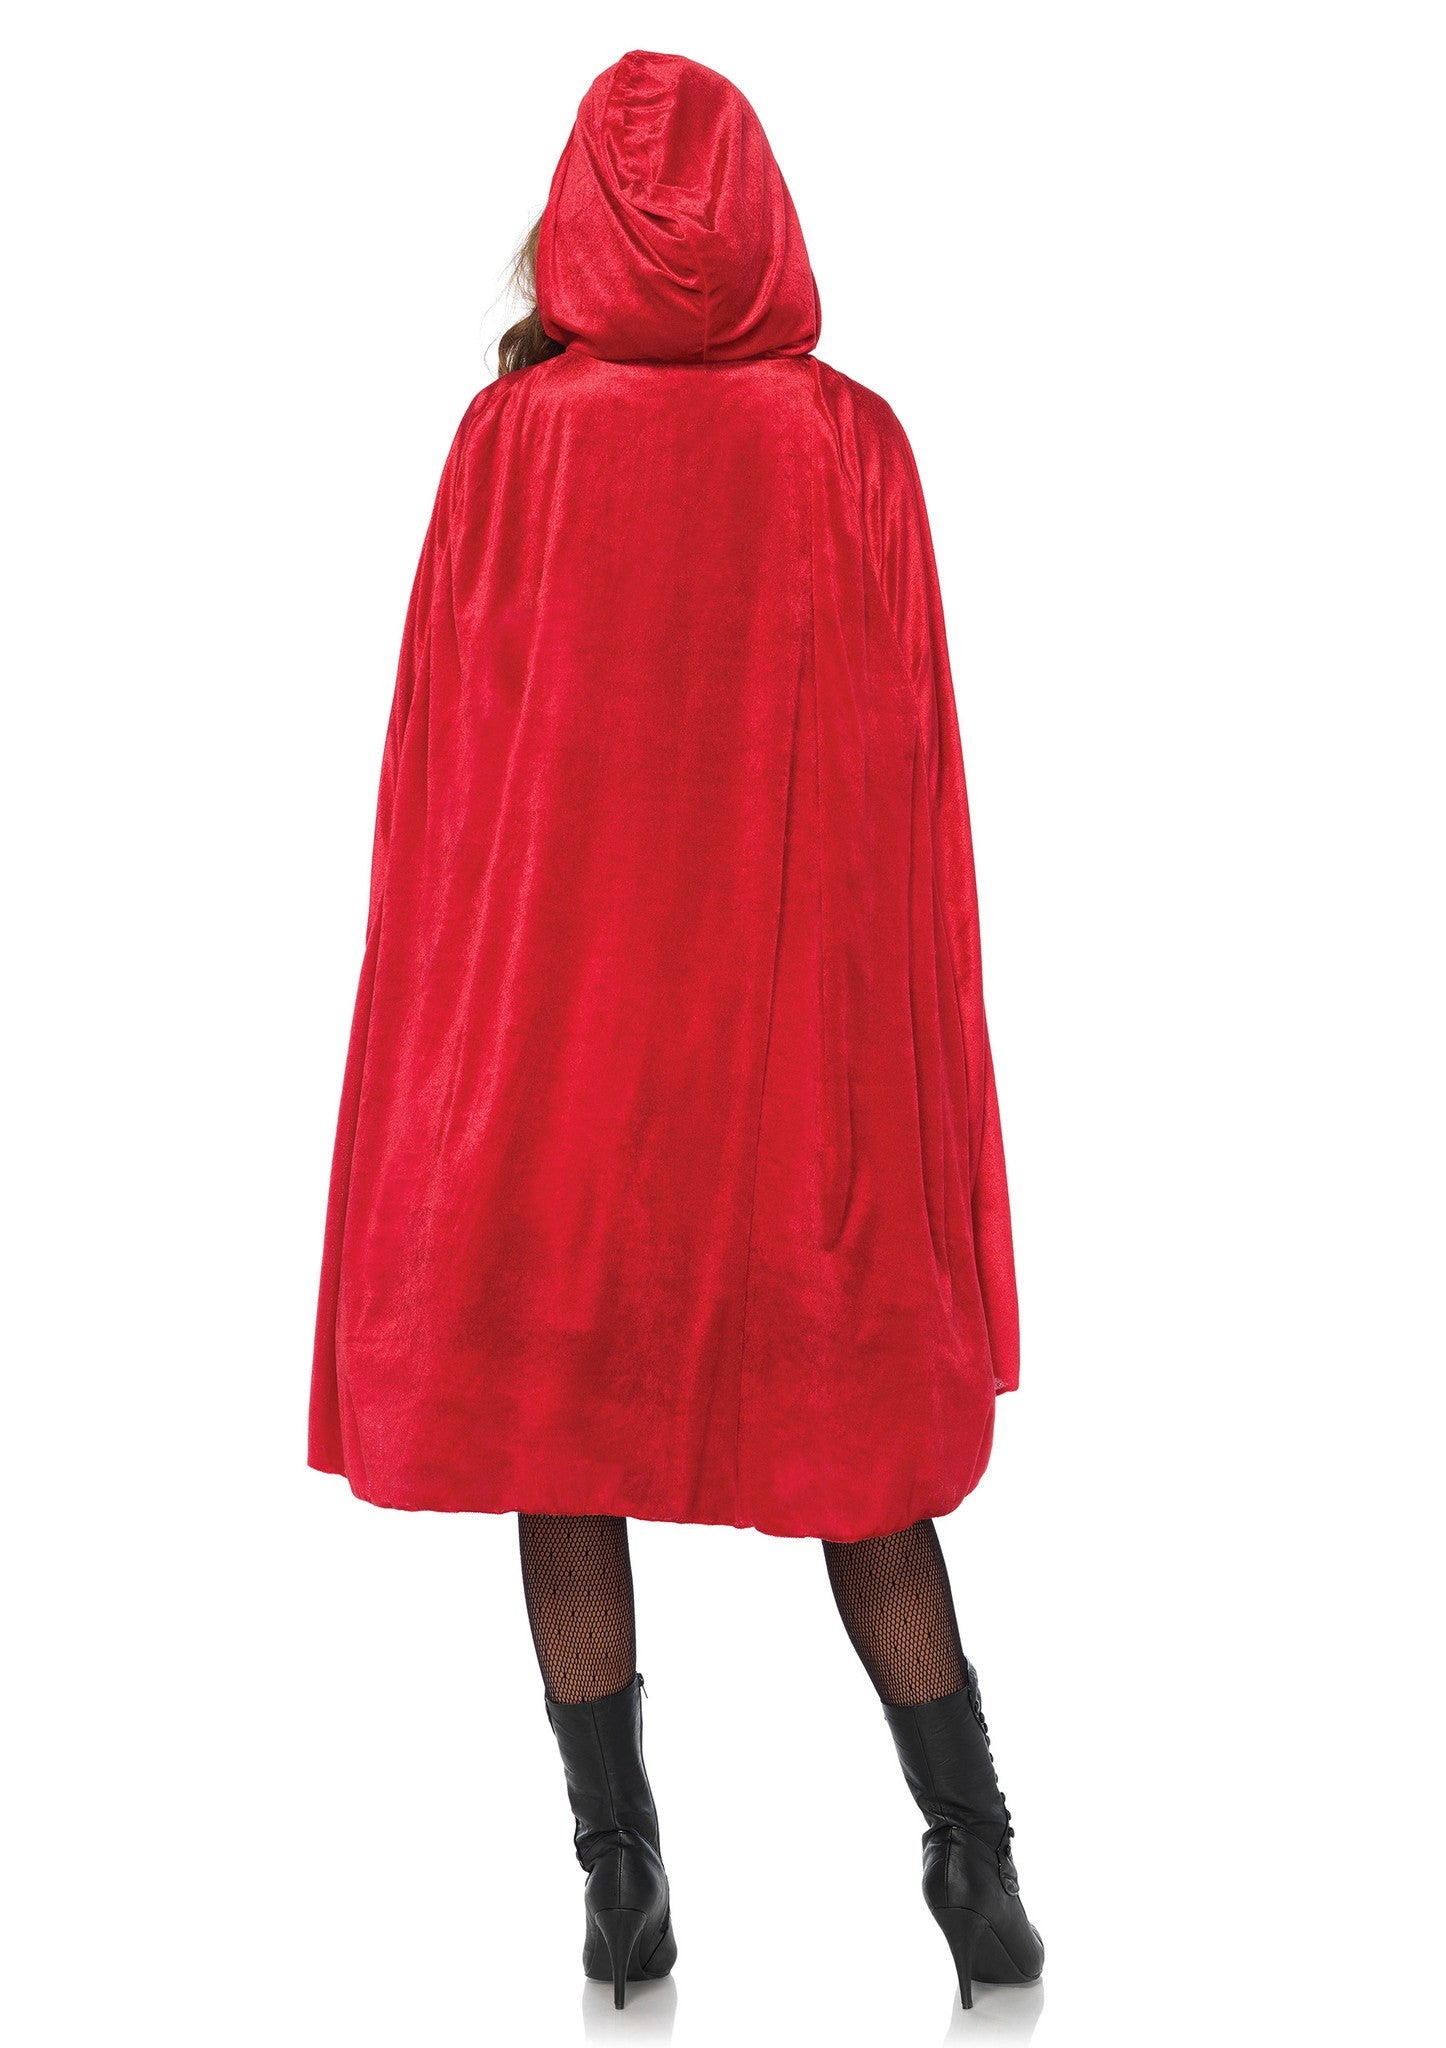 Costume - Classic Red Riding Hood Costume - Little Red Riding Hood